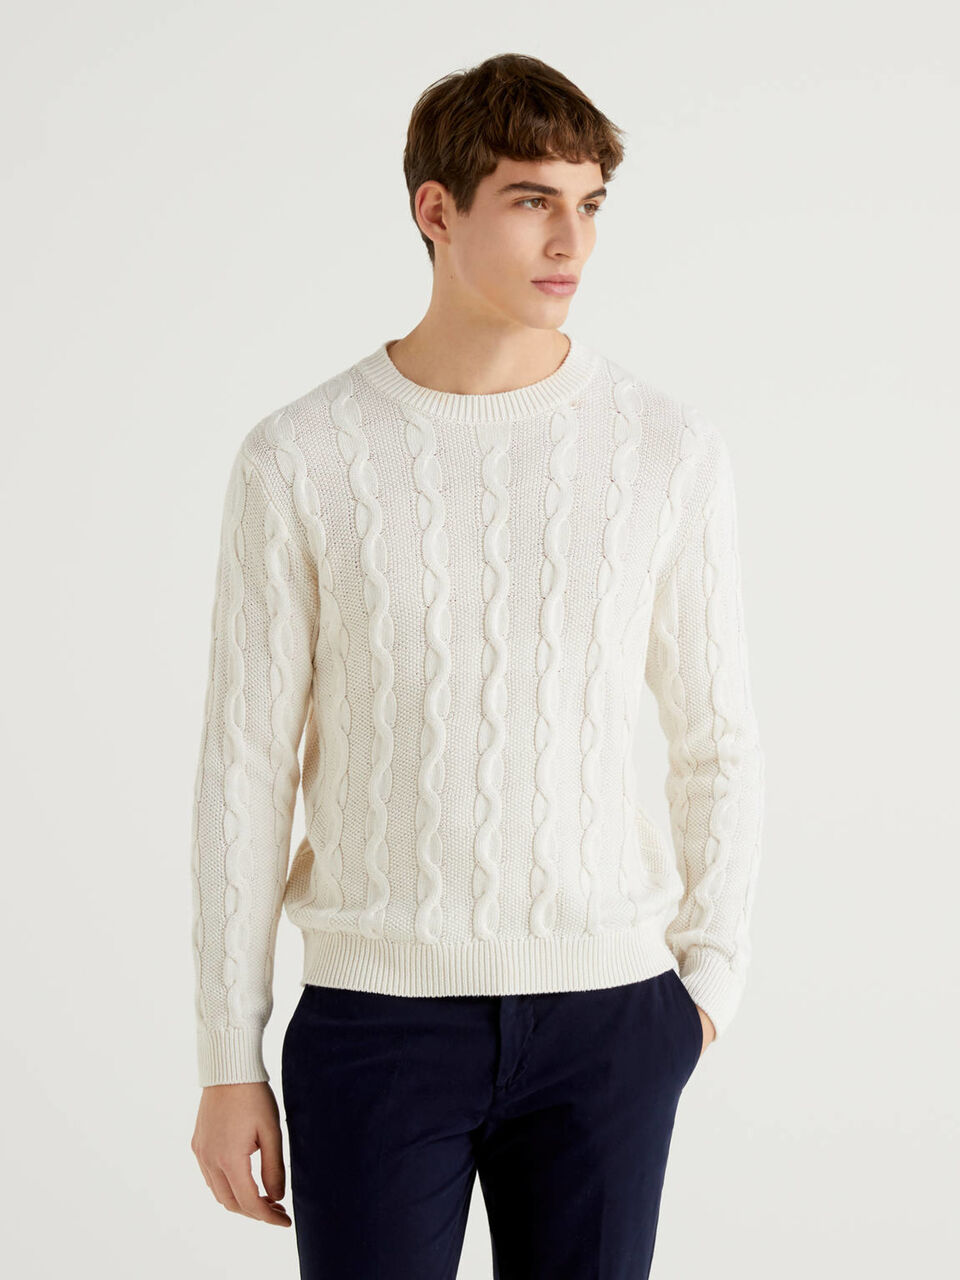 Crew neck sweater with cables